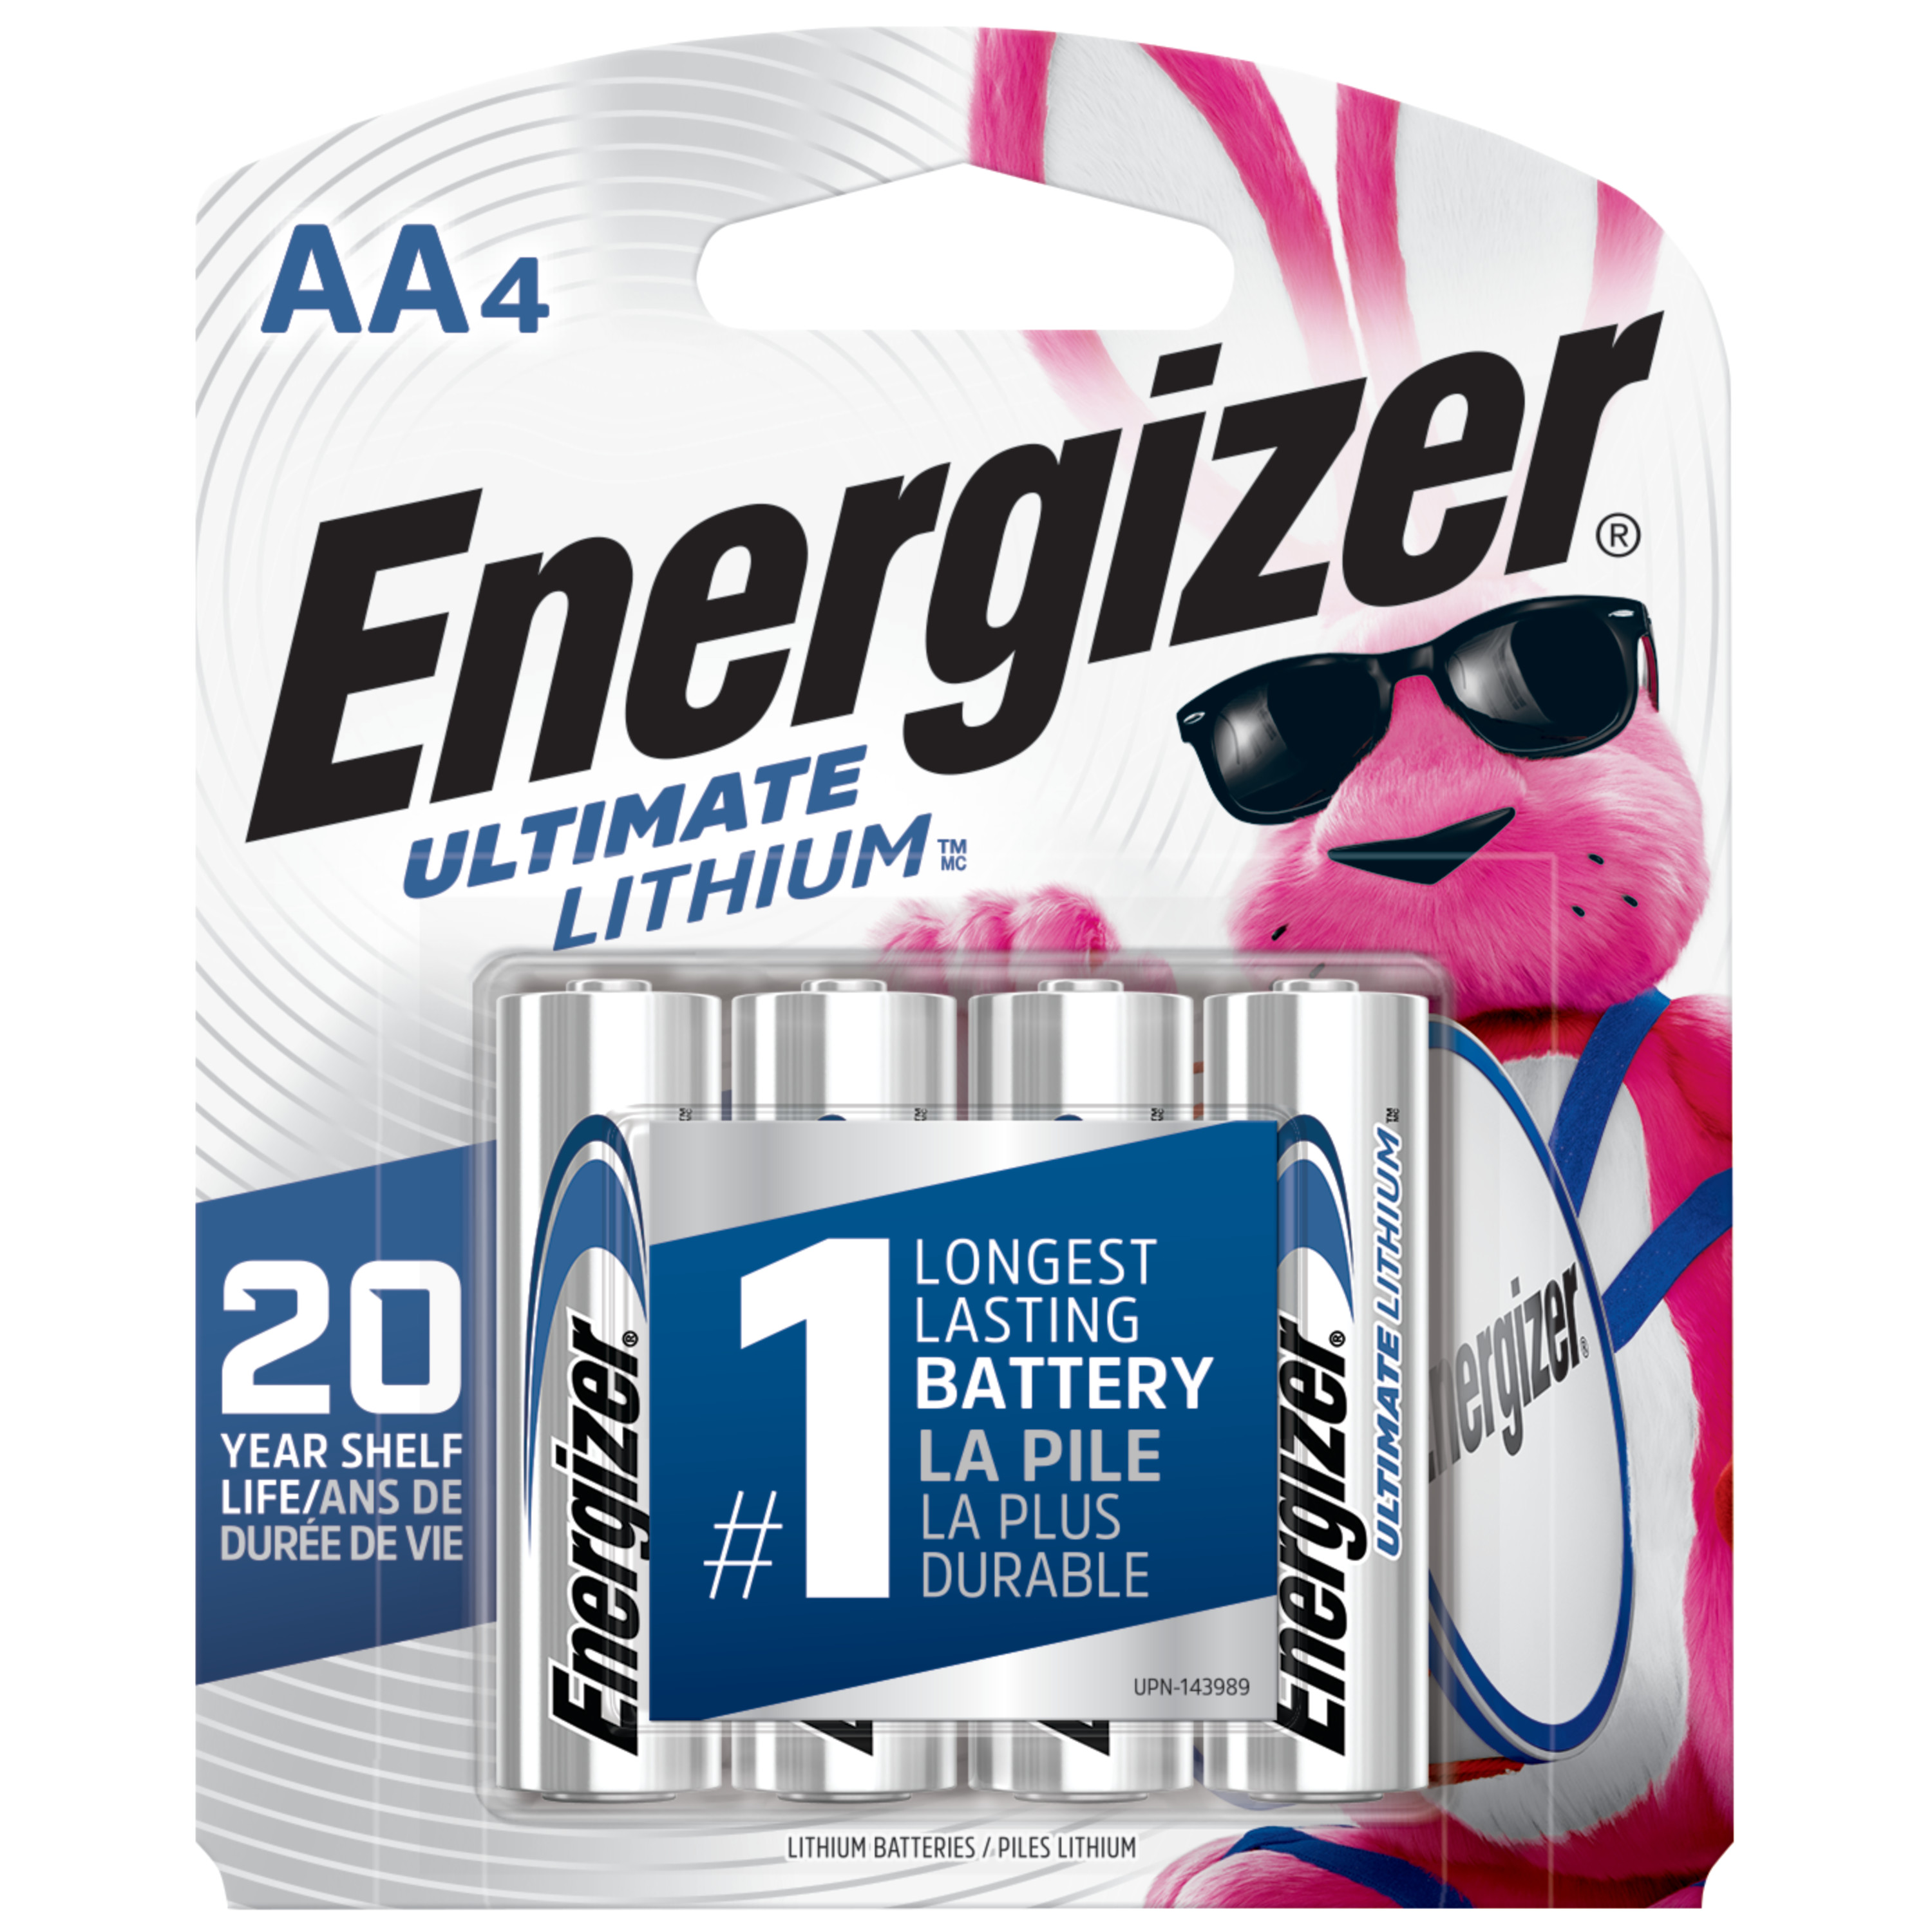 Energizer Ultimate Lithium AA Batteries (4 Pack), Double A Batteries - image 1 of 15